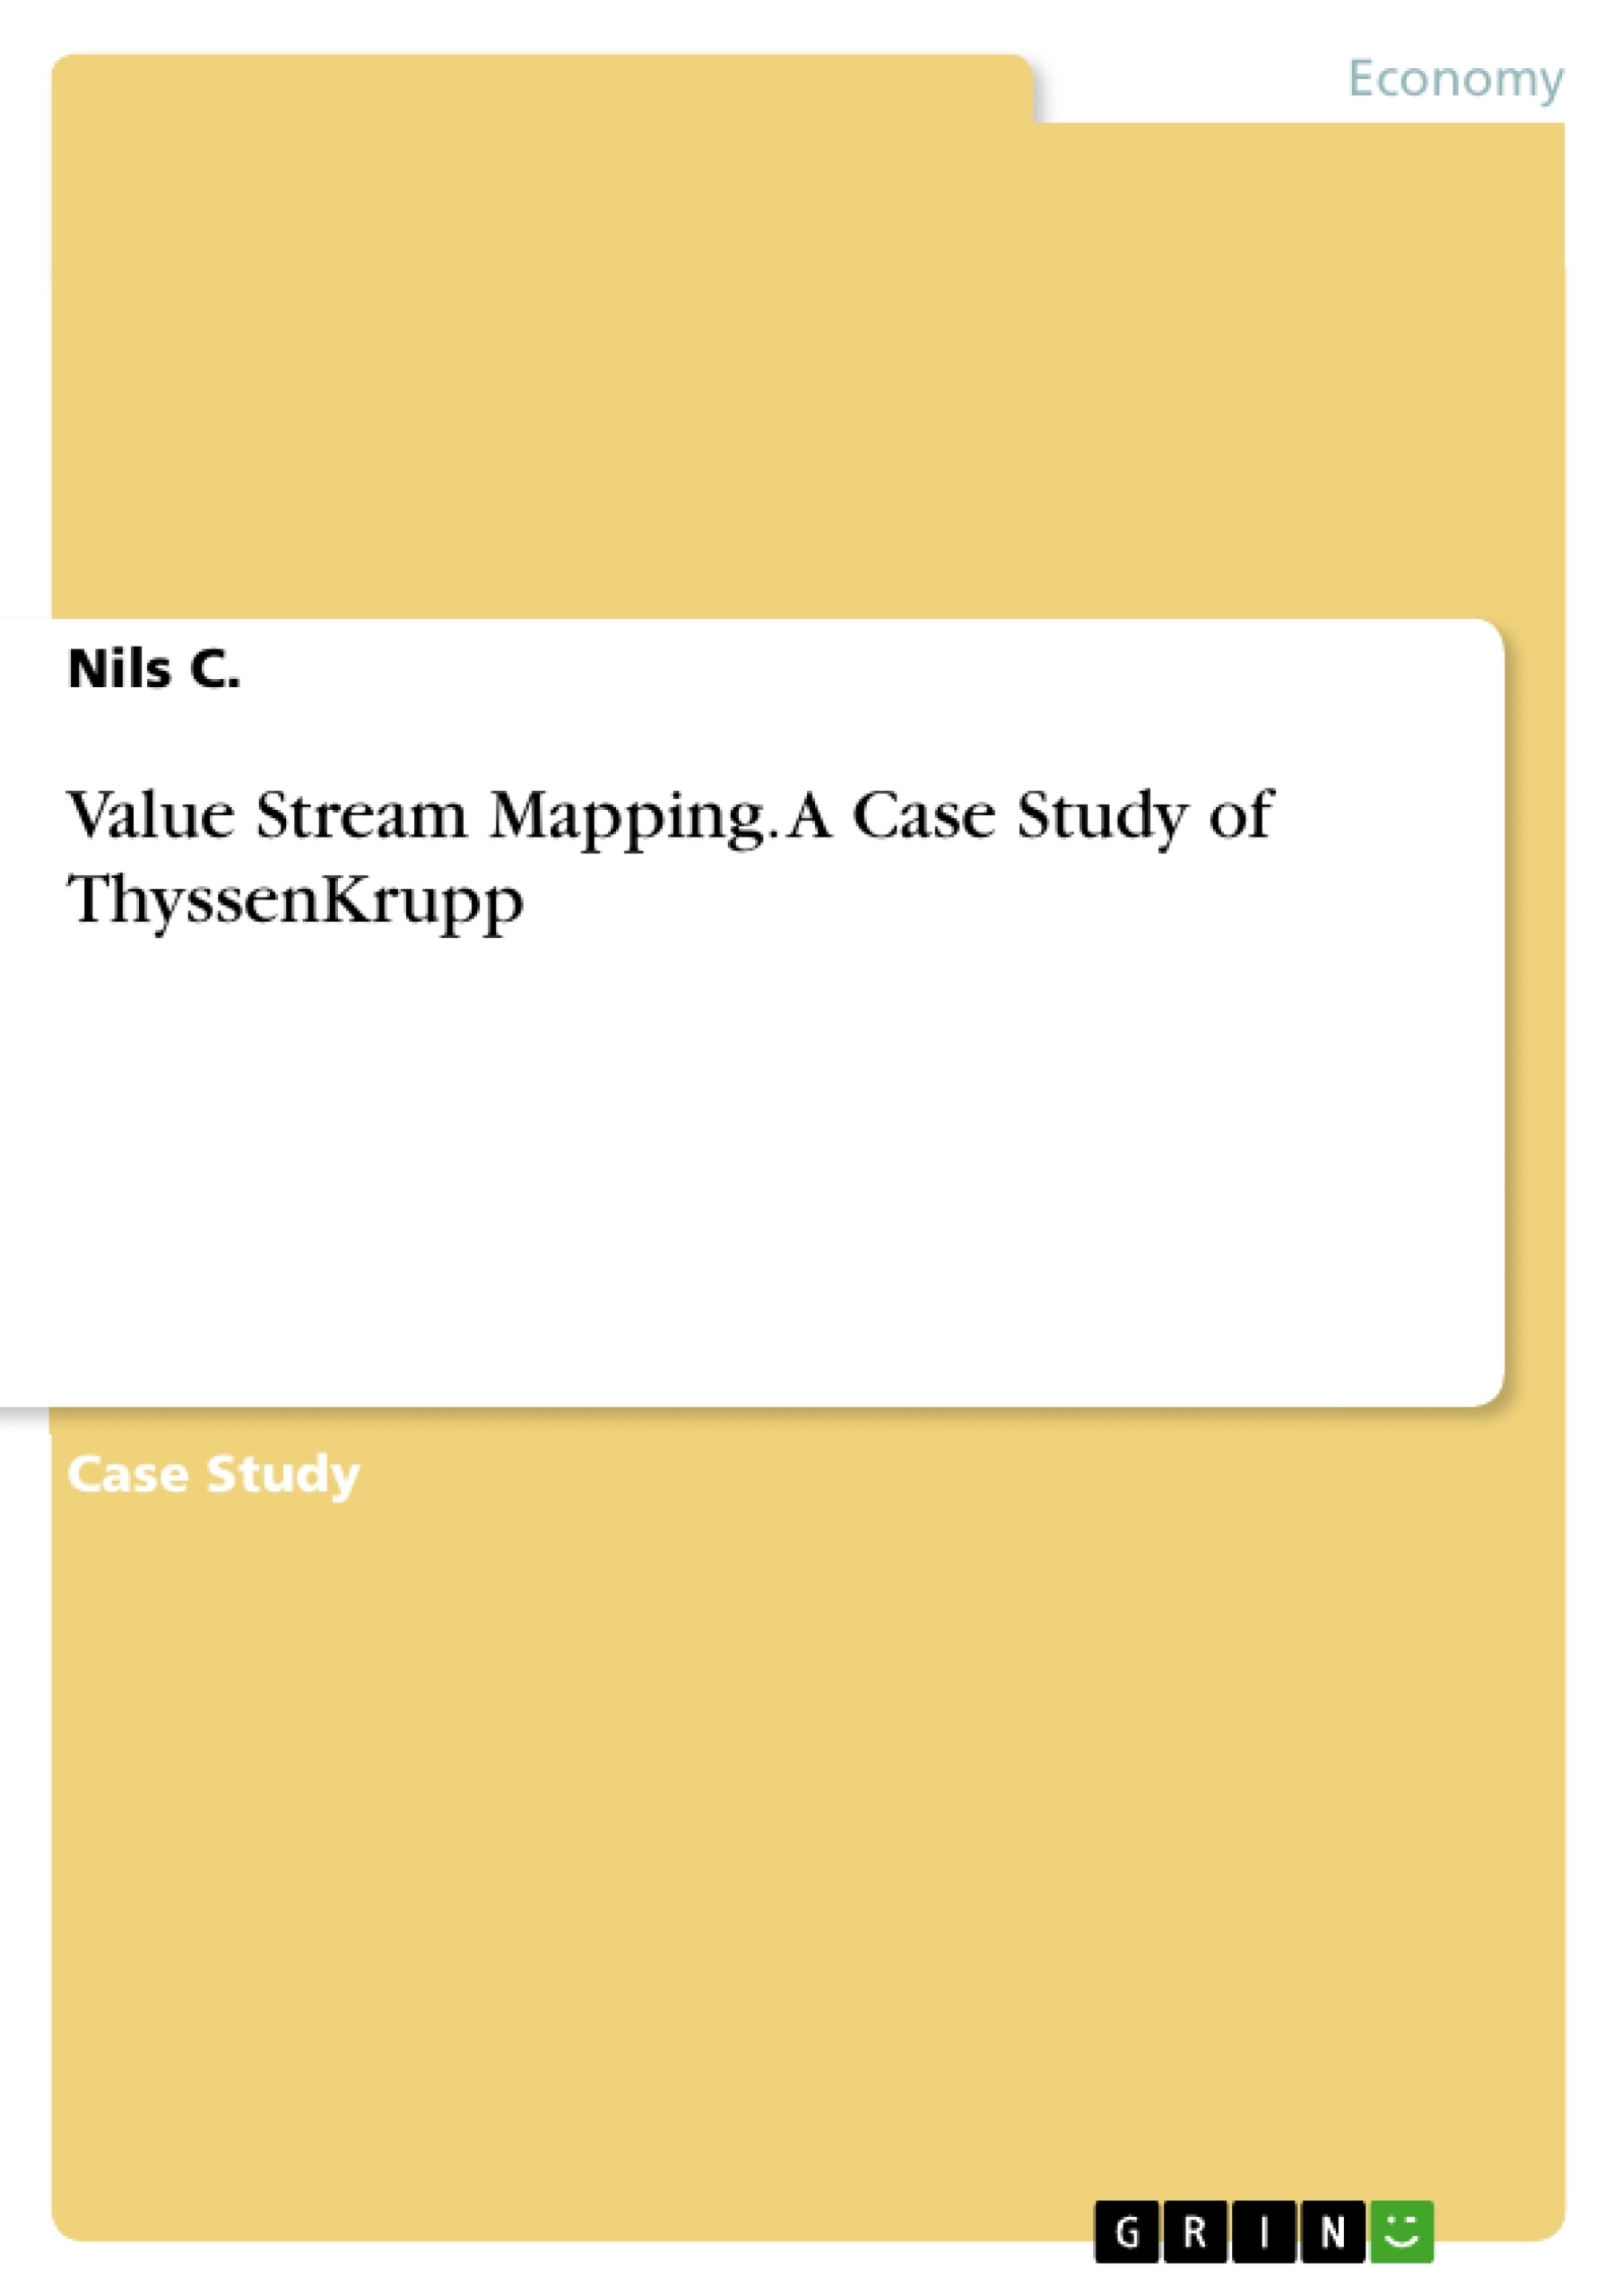 Title: Value Stream Mapping. A Case Study of ThyssenKrupp